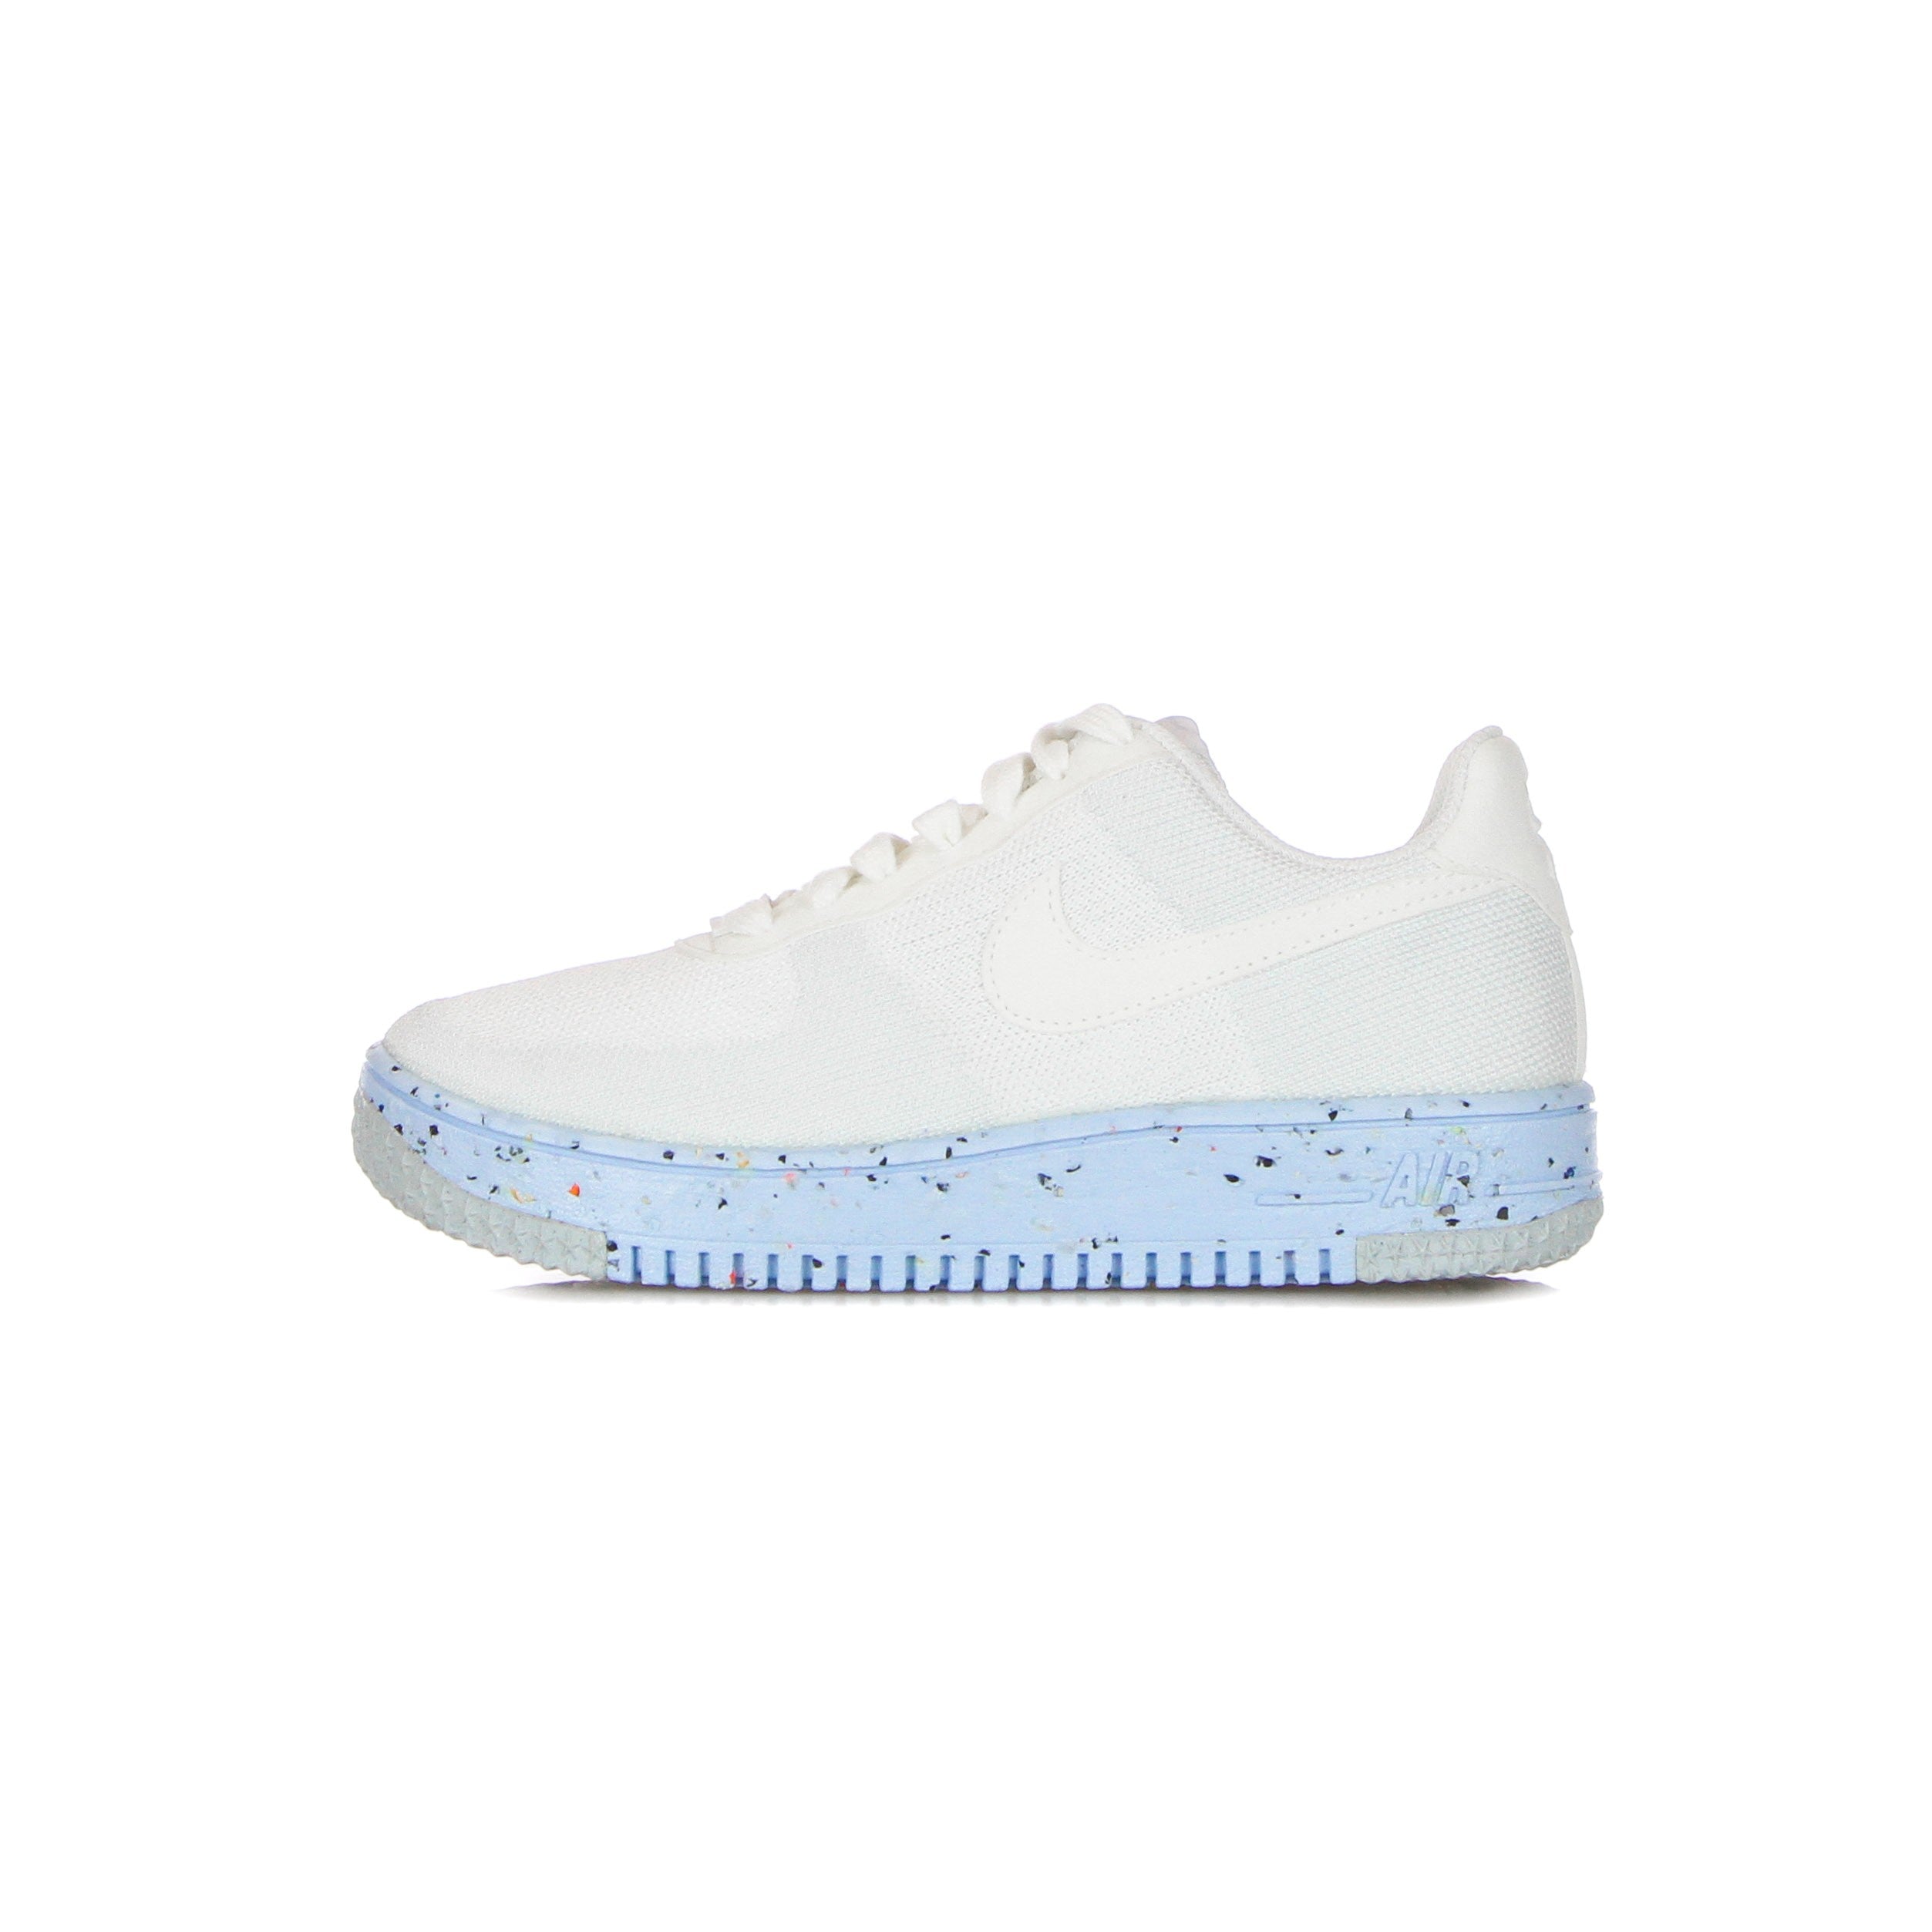 W Air Force 1 Crater Flyknit White/white/pure Platinum Women's Low Shoe